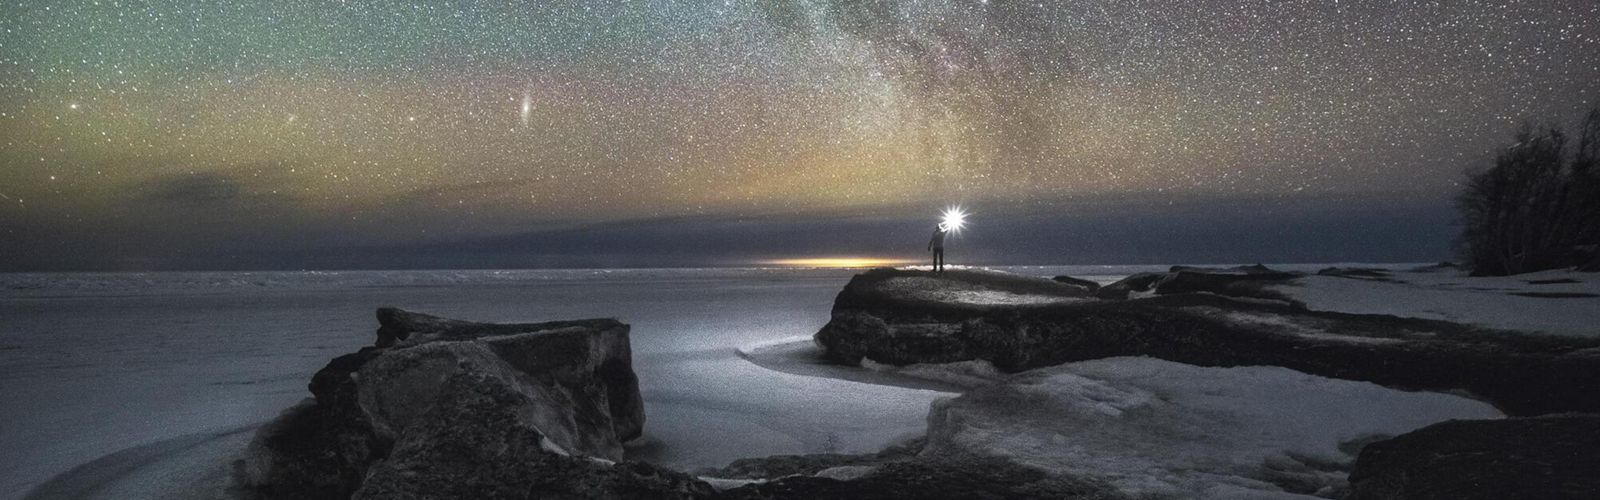 A person holds a light while standing at the edge of a lake. The sky is covered in thousands of stars. 